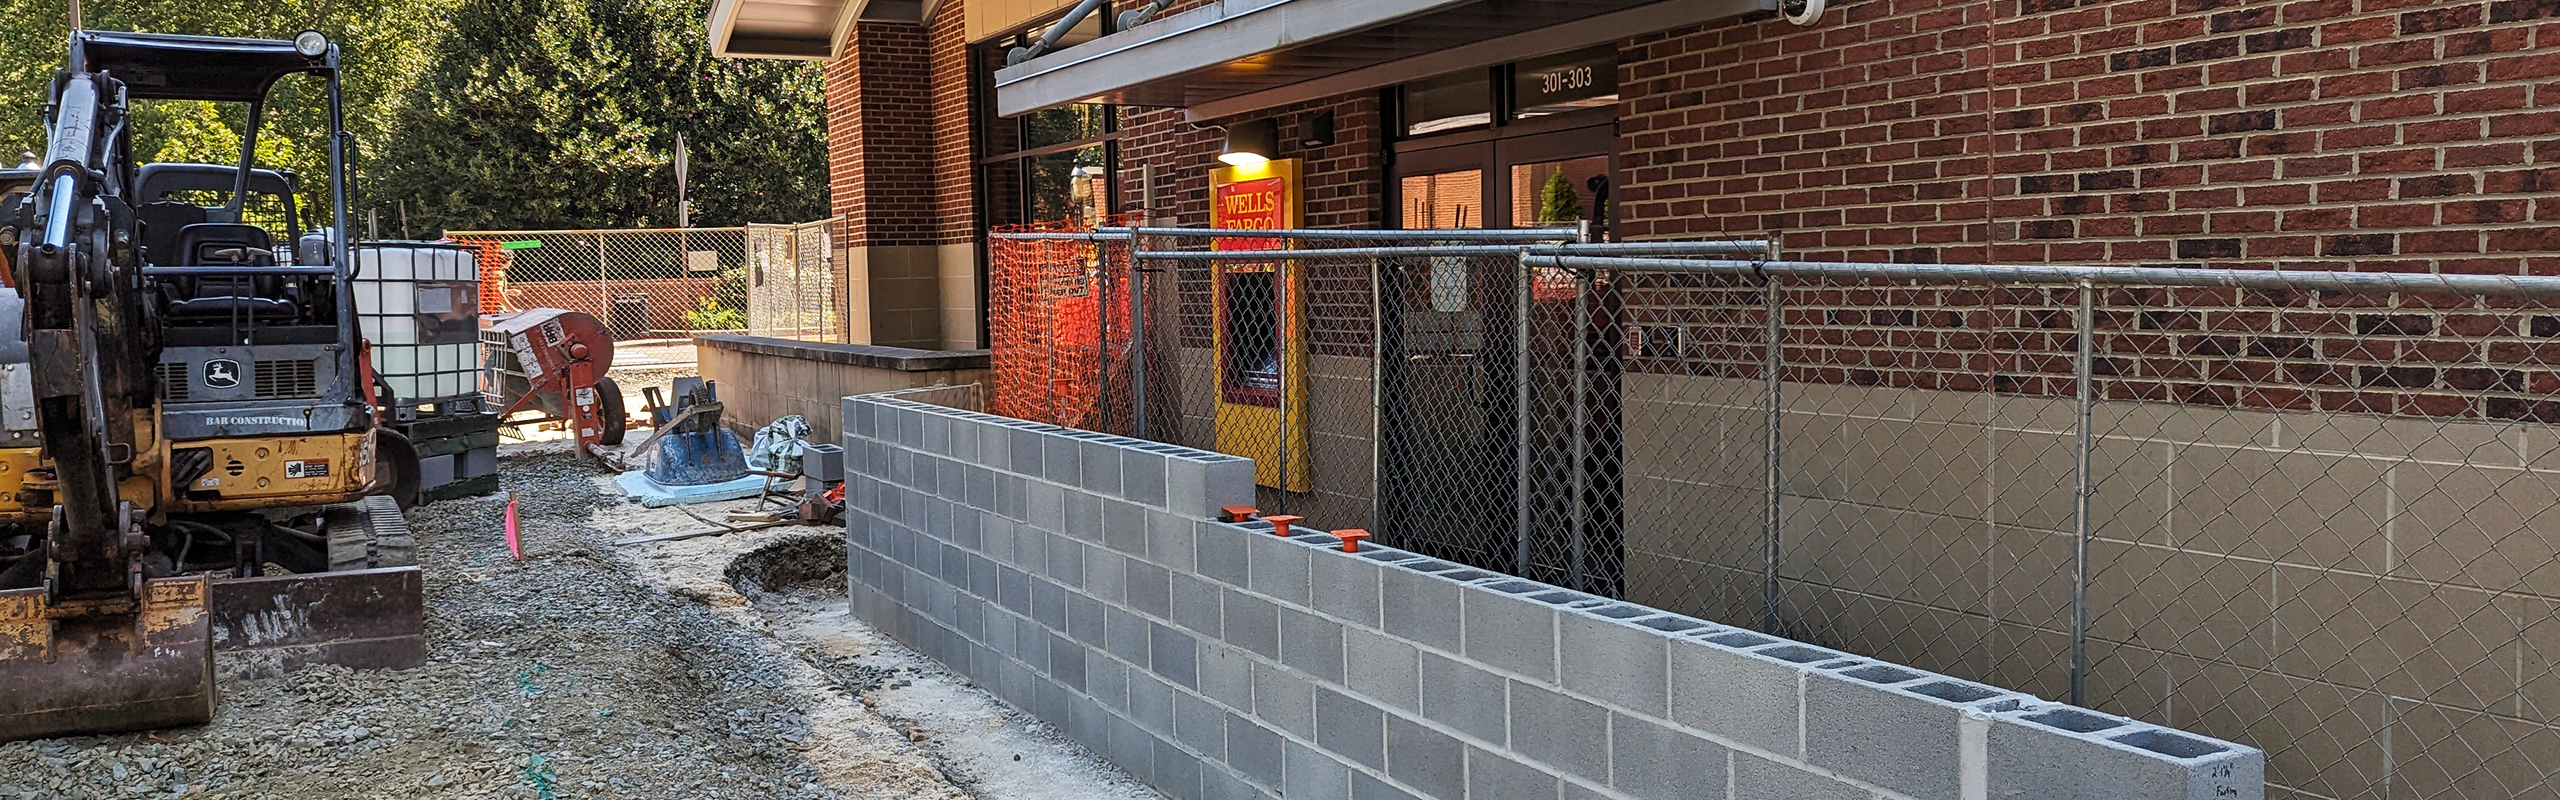 Construction in front of the Maker Hub